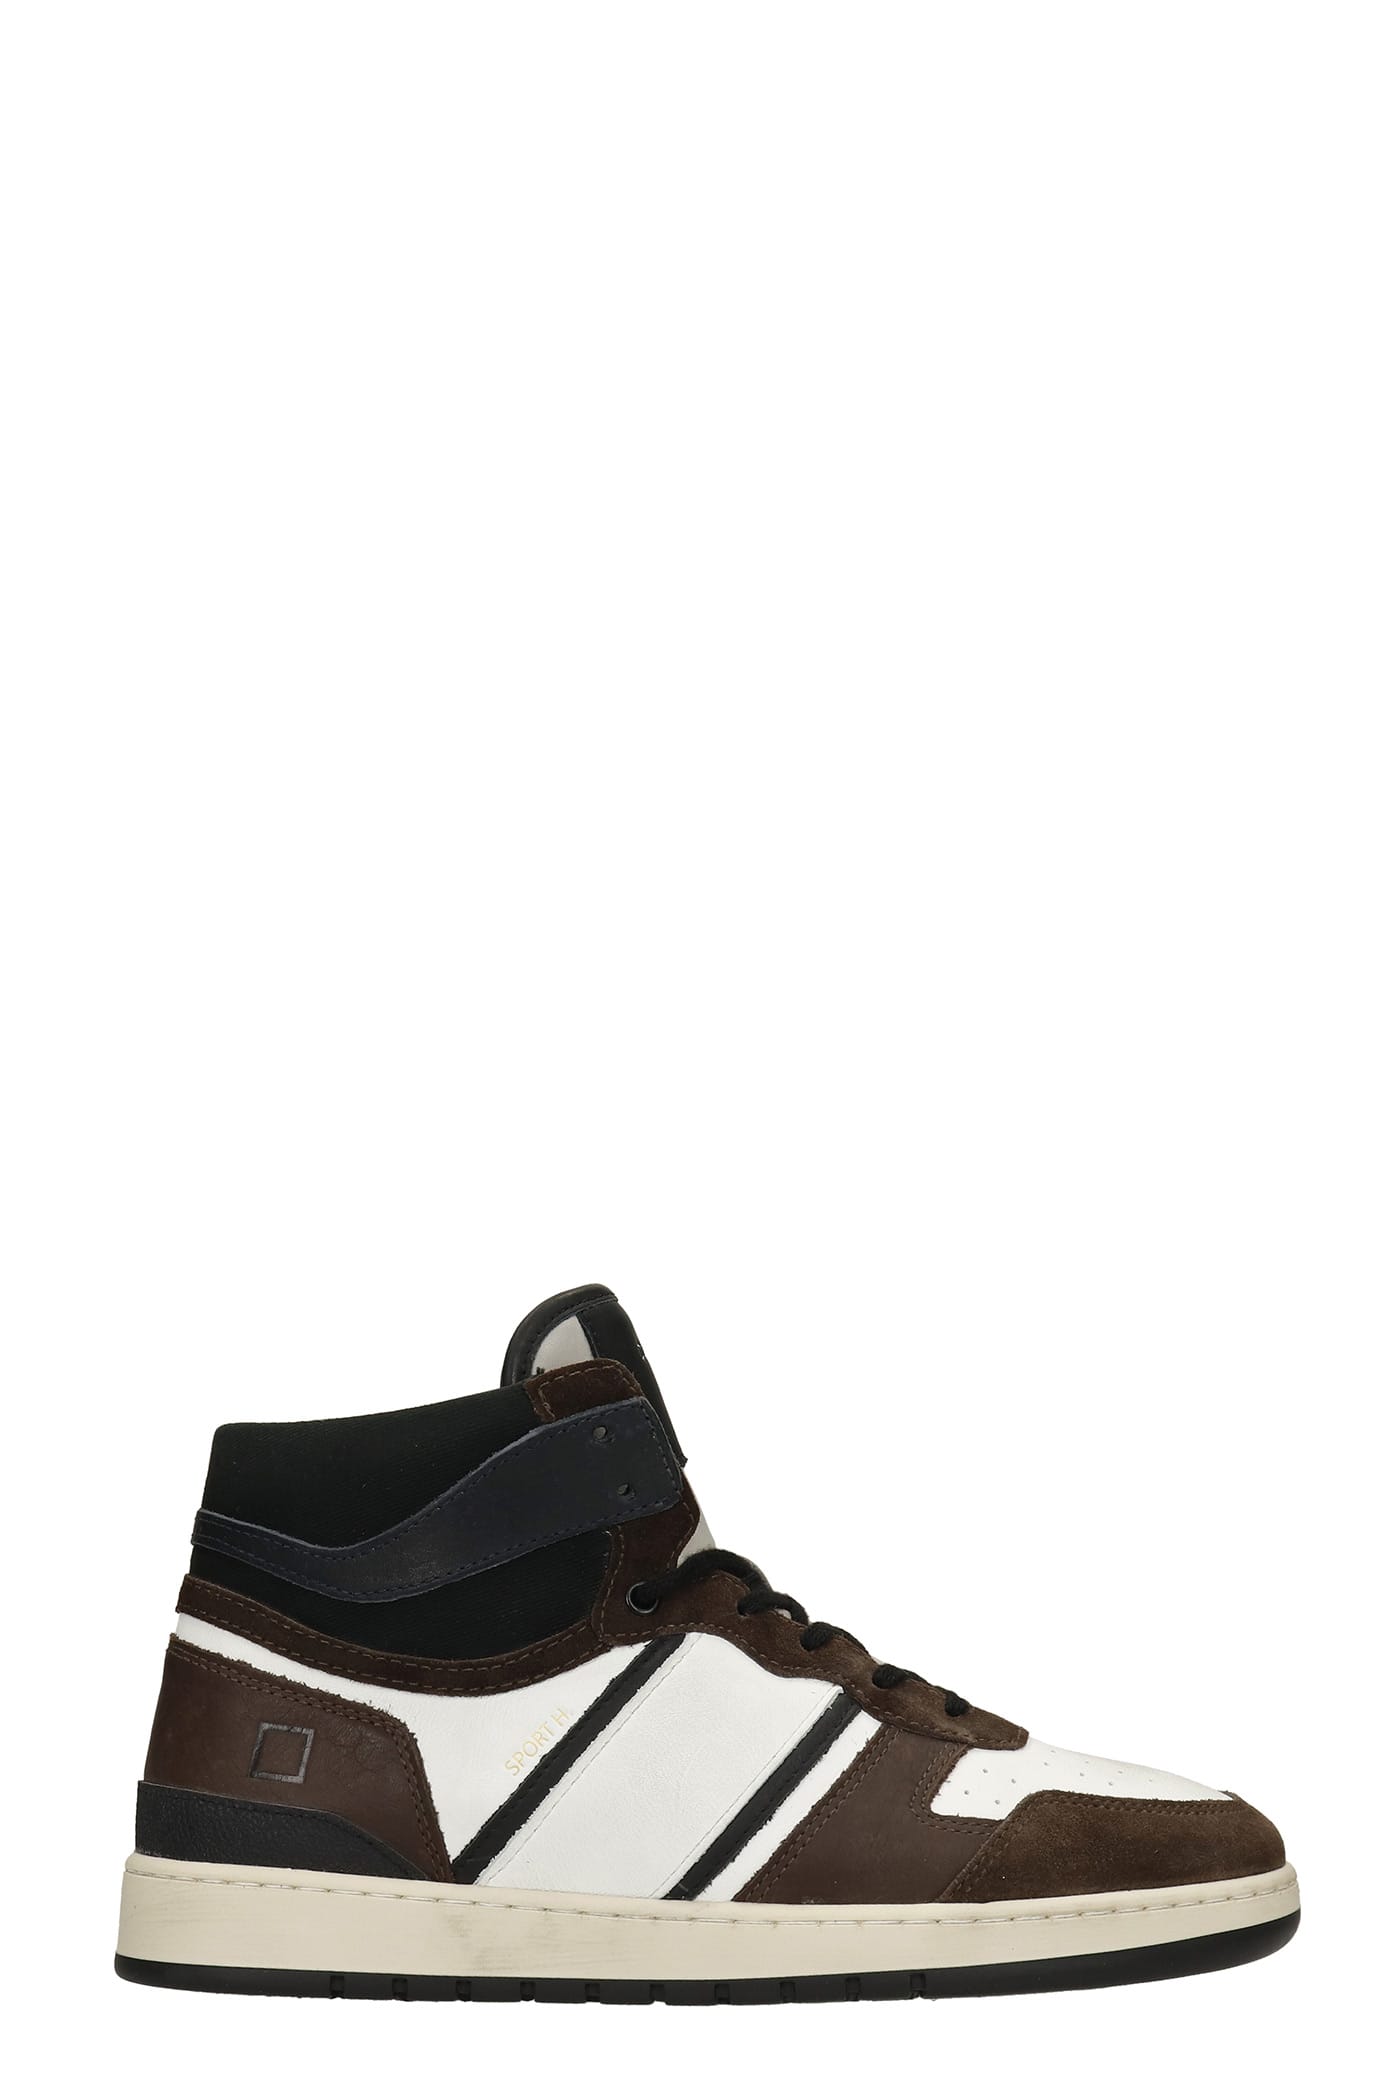 D.A.T.E. Sport High Sneakers In White Suede And Leather